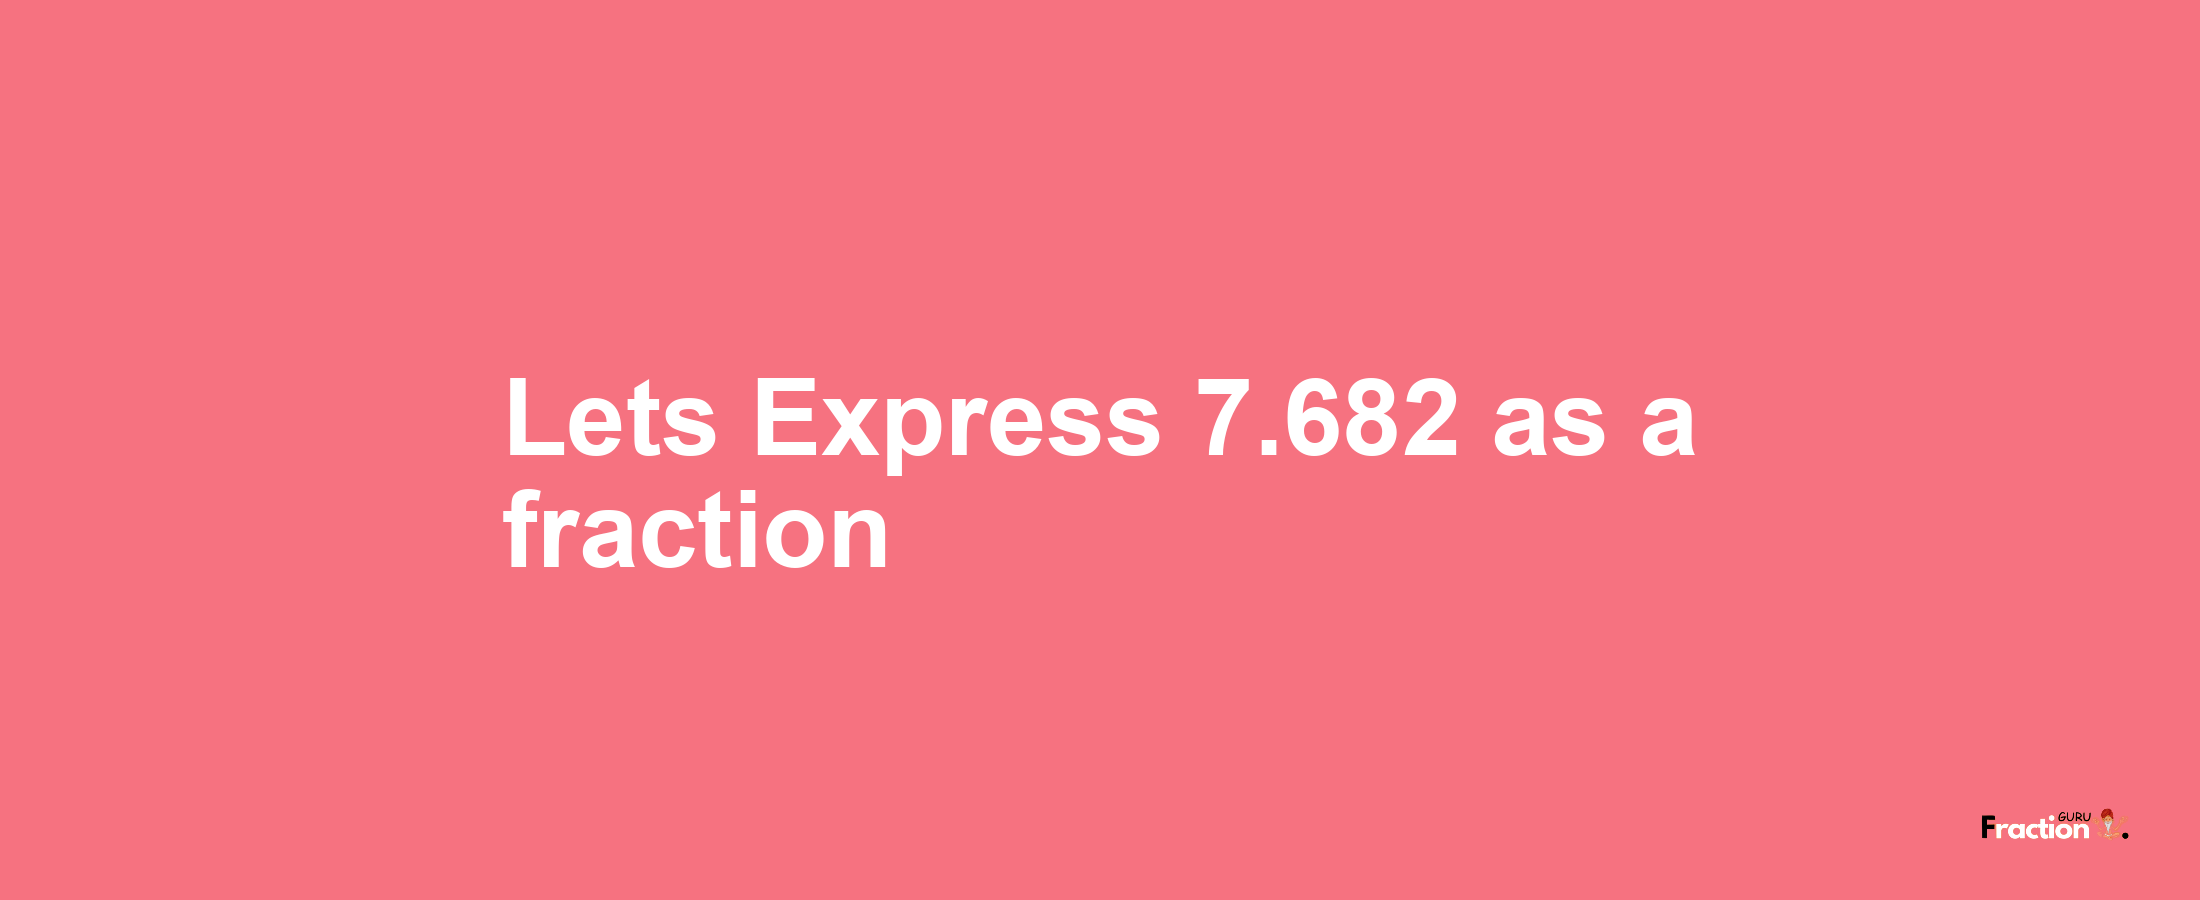 Lets Express 7.682 as afraction